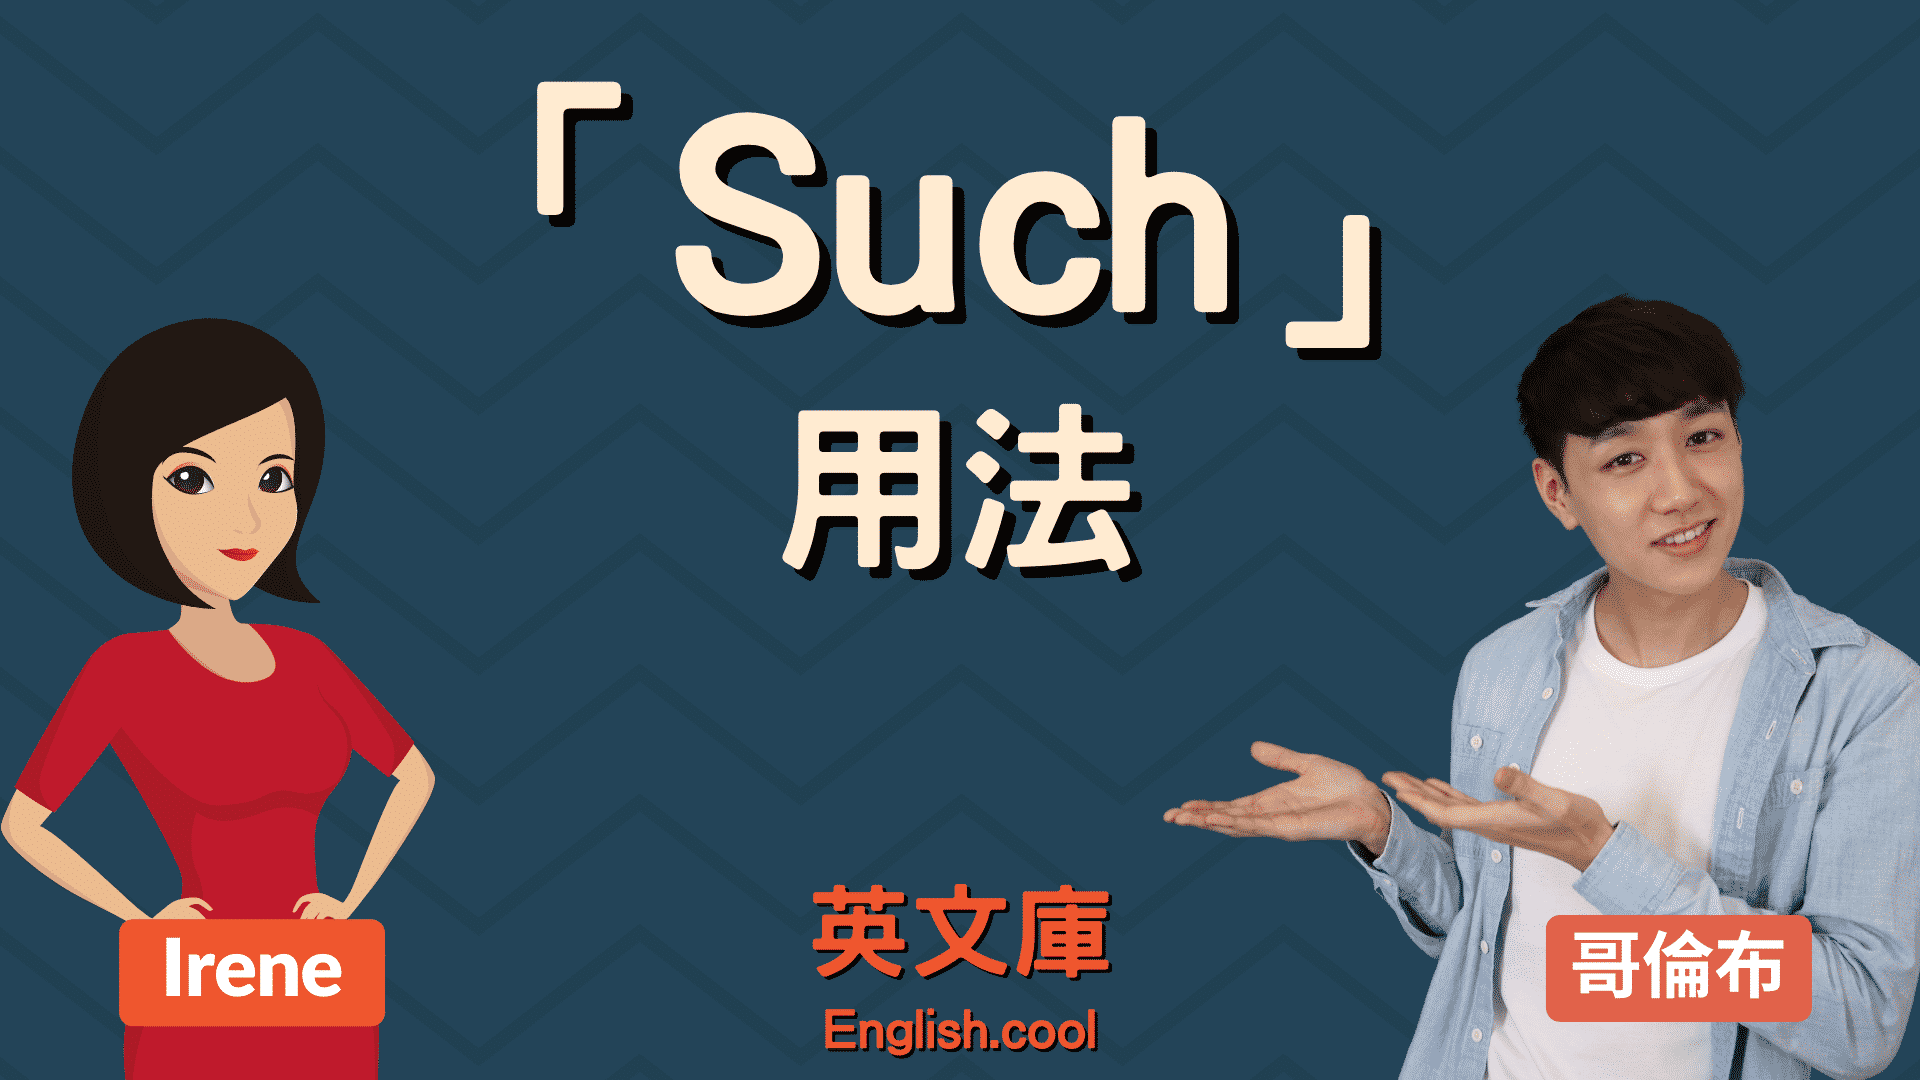 You are currently viewing 「such」正確用法是？來看例句一次搞懂！